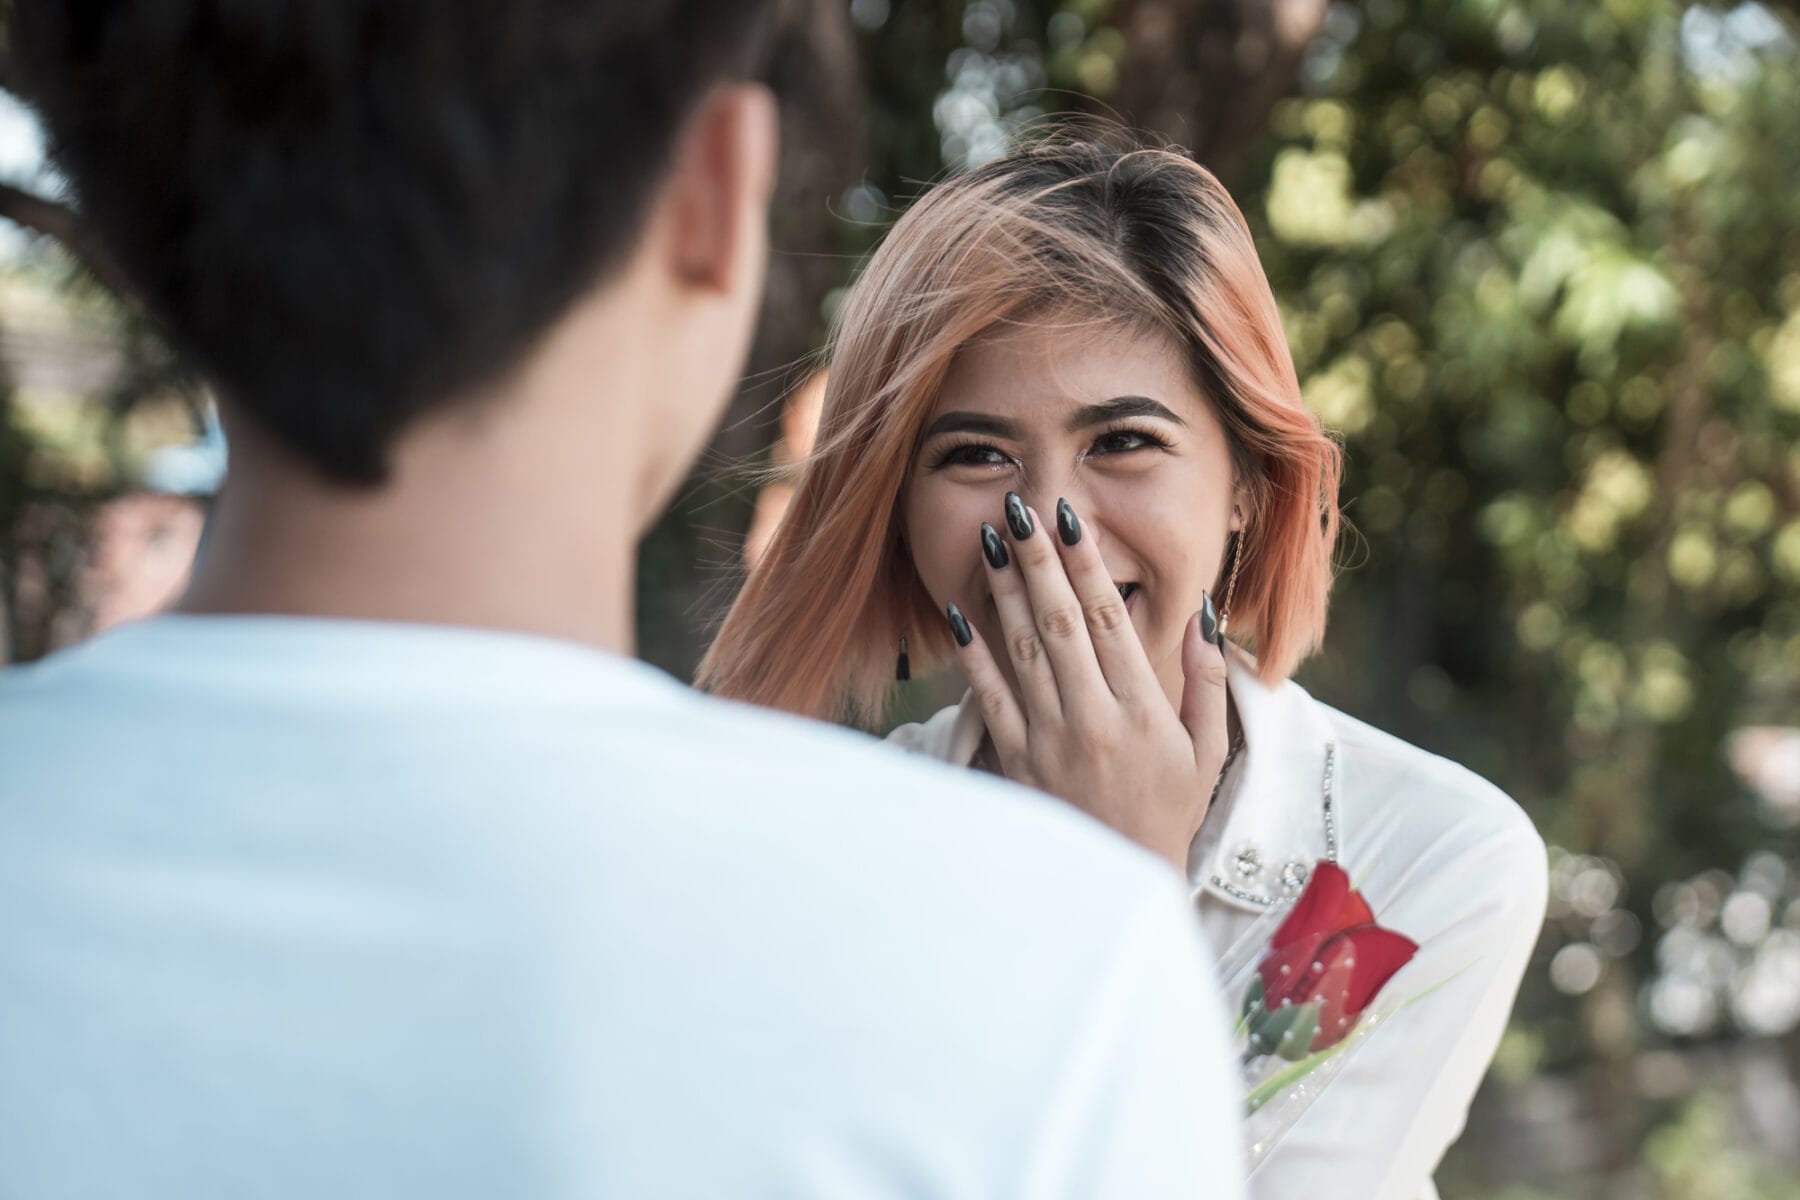 Woman with orange hair smiling and covering her mouth with her hand, facing a man in a white t-shirt who represents the mu of their relationship, blurred in the foreground. My meaning in relationships